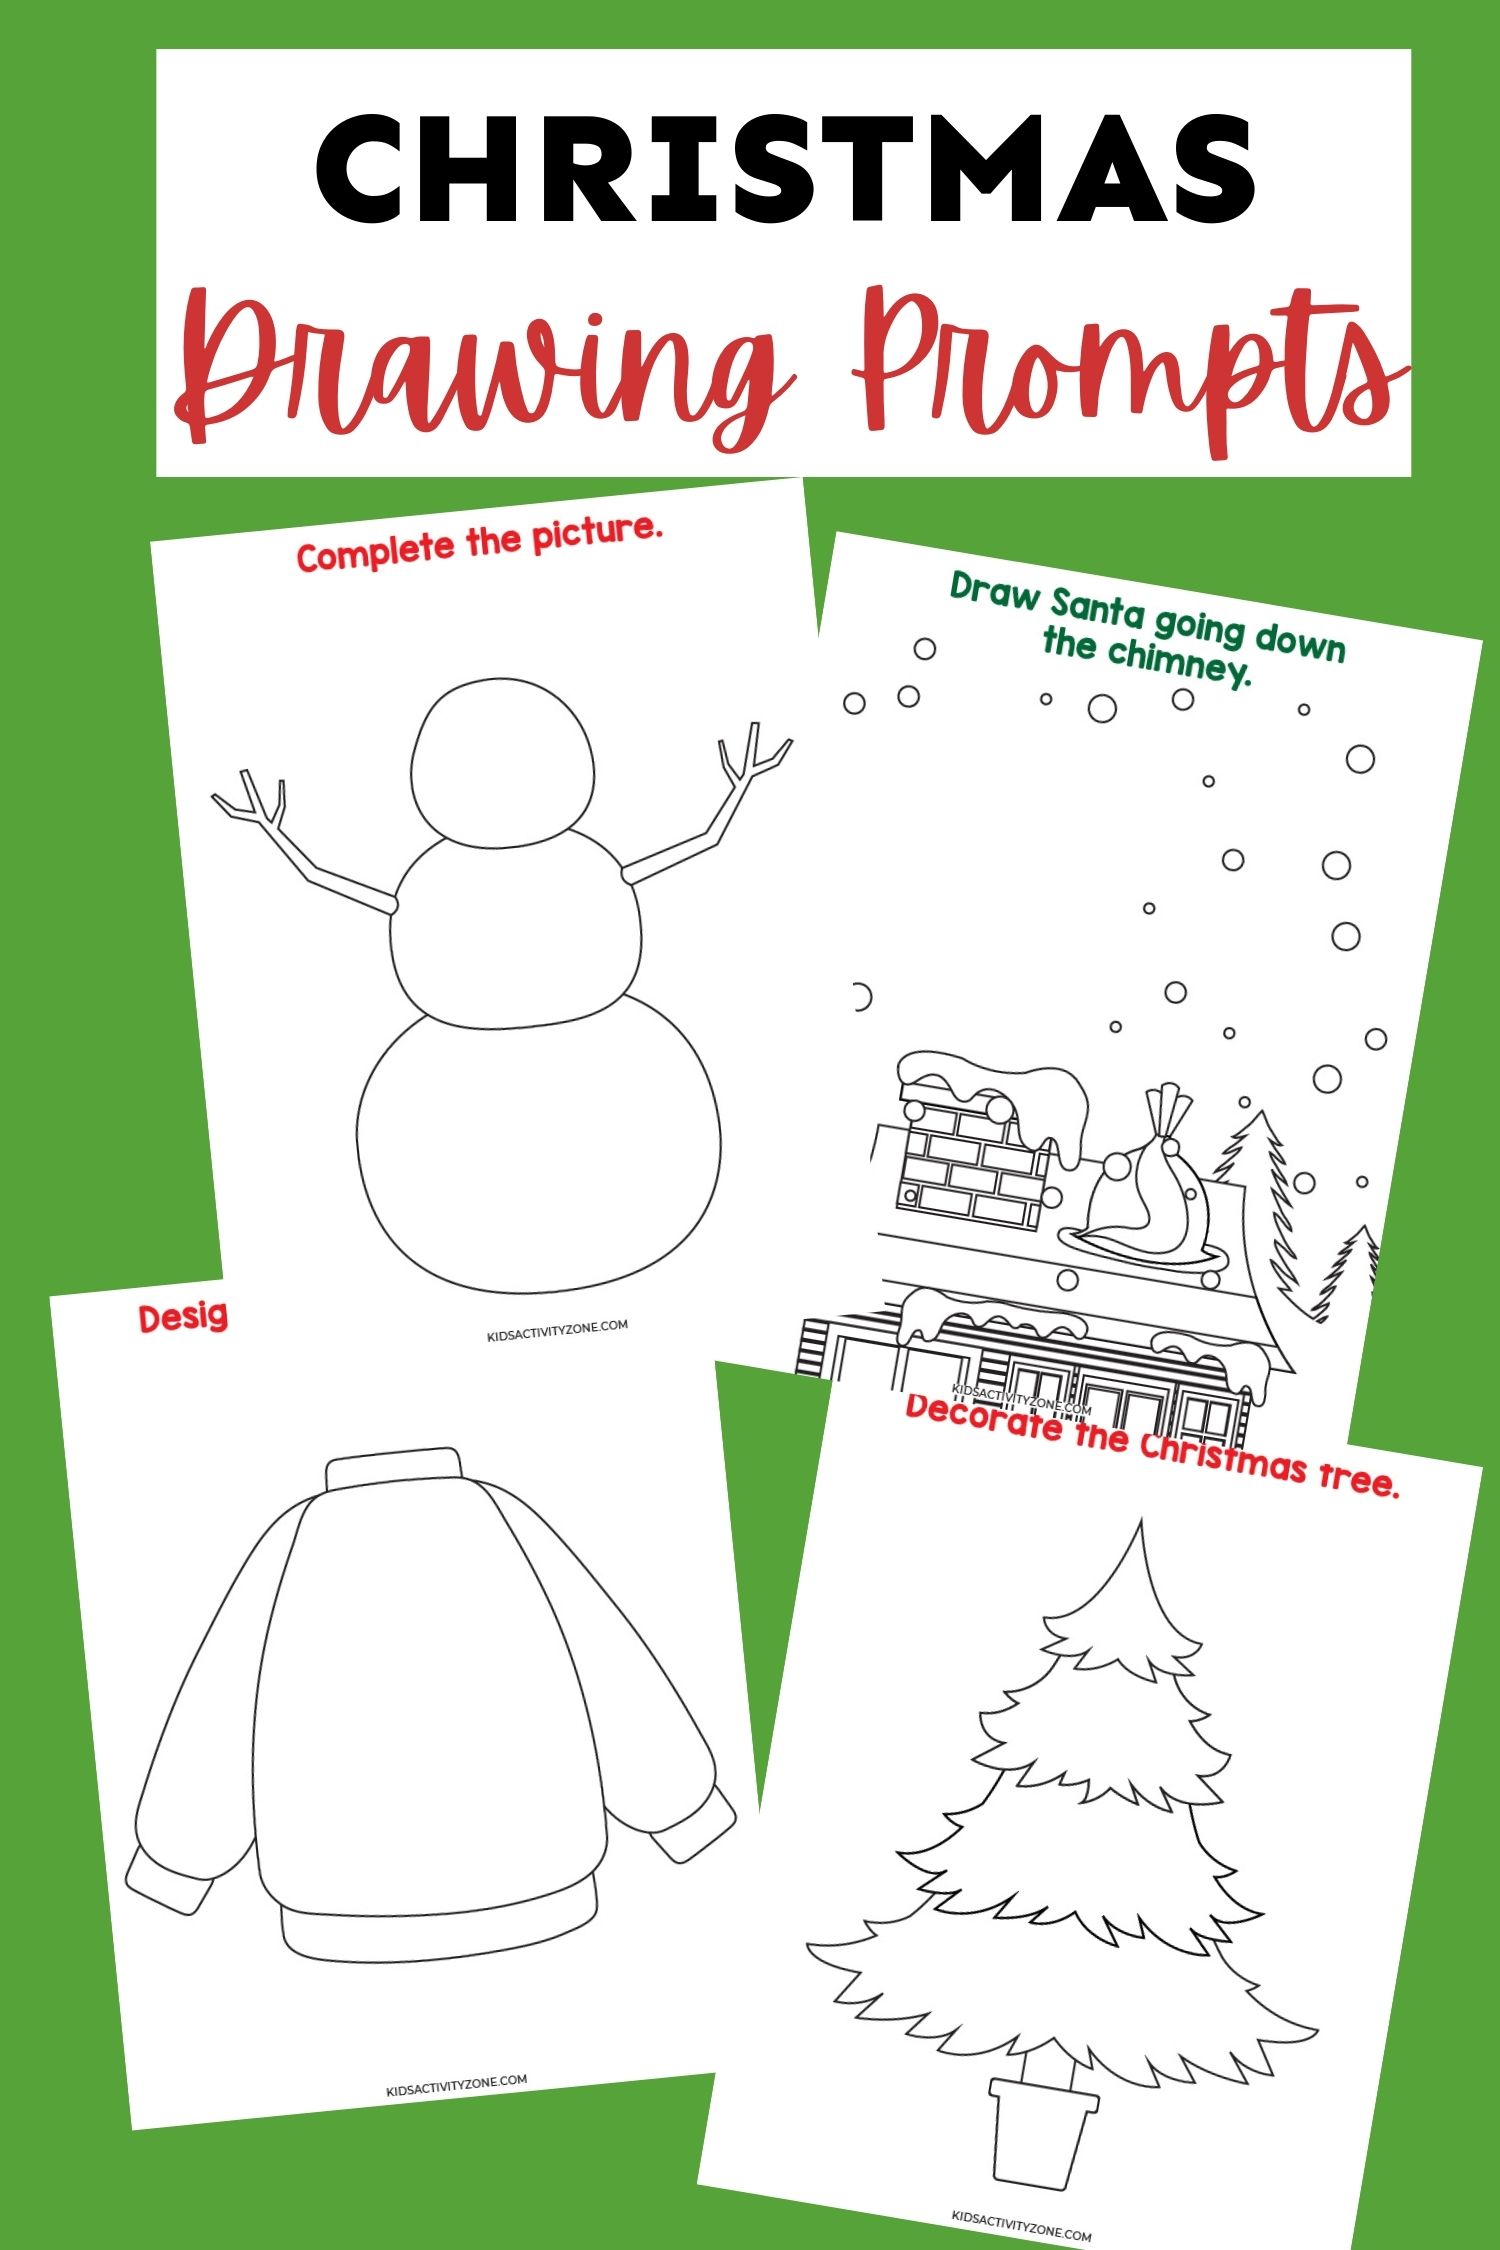 Christmas Drawing Prompts - Featured Image